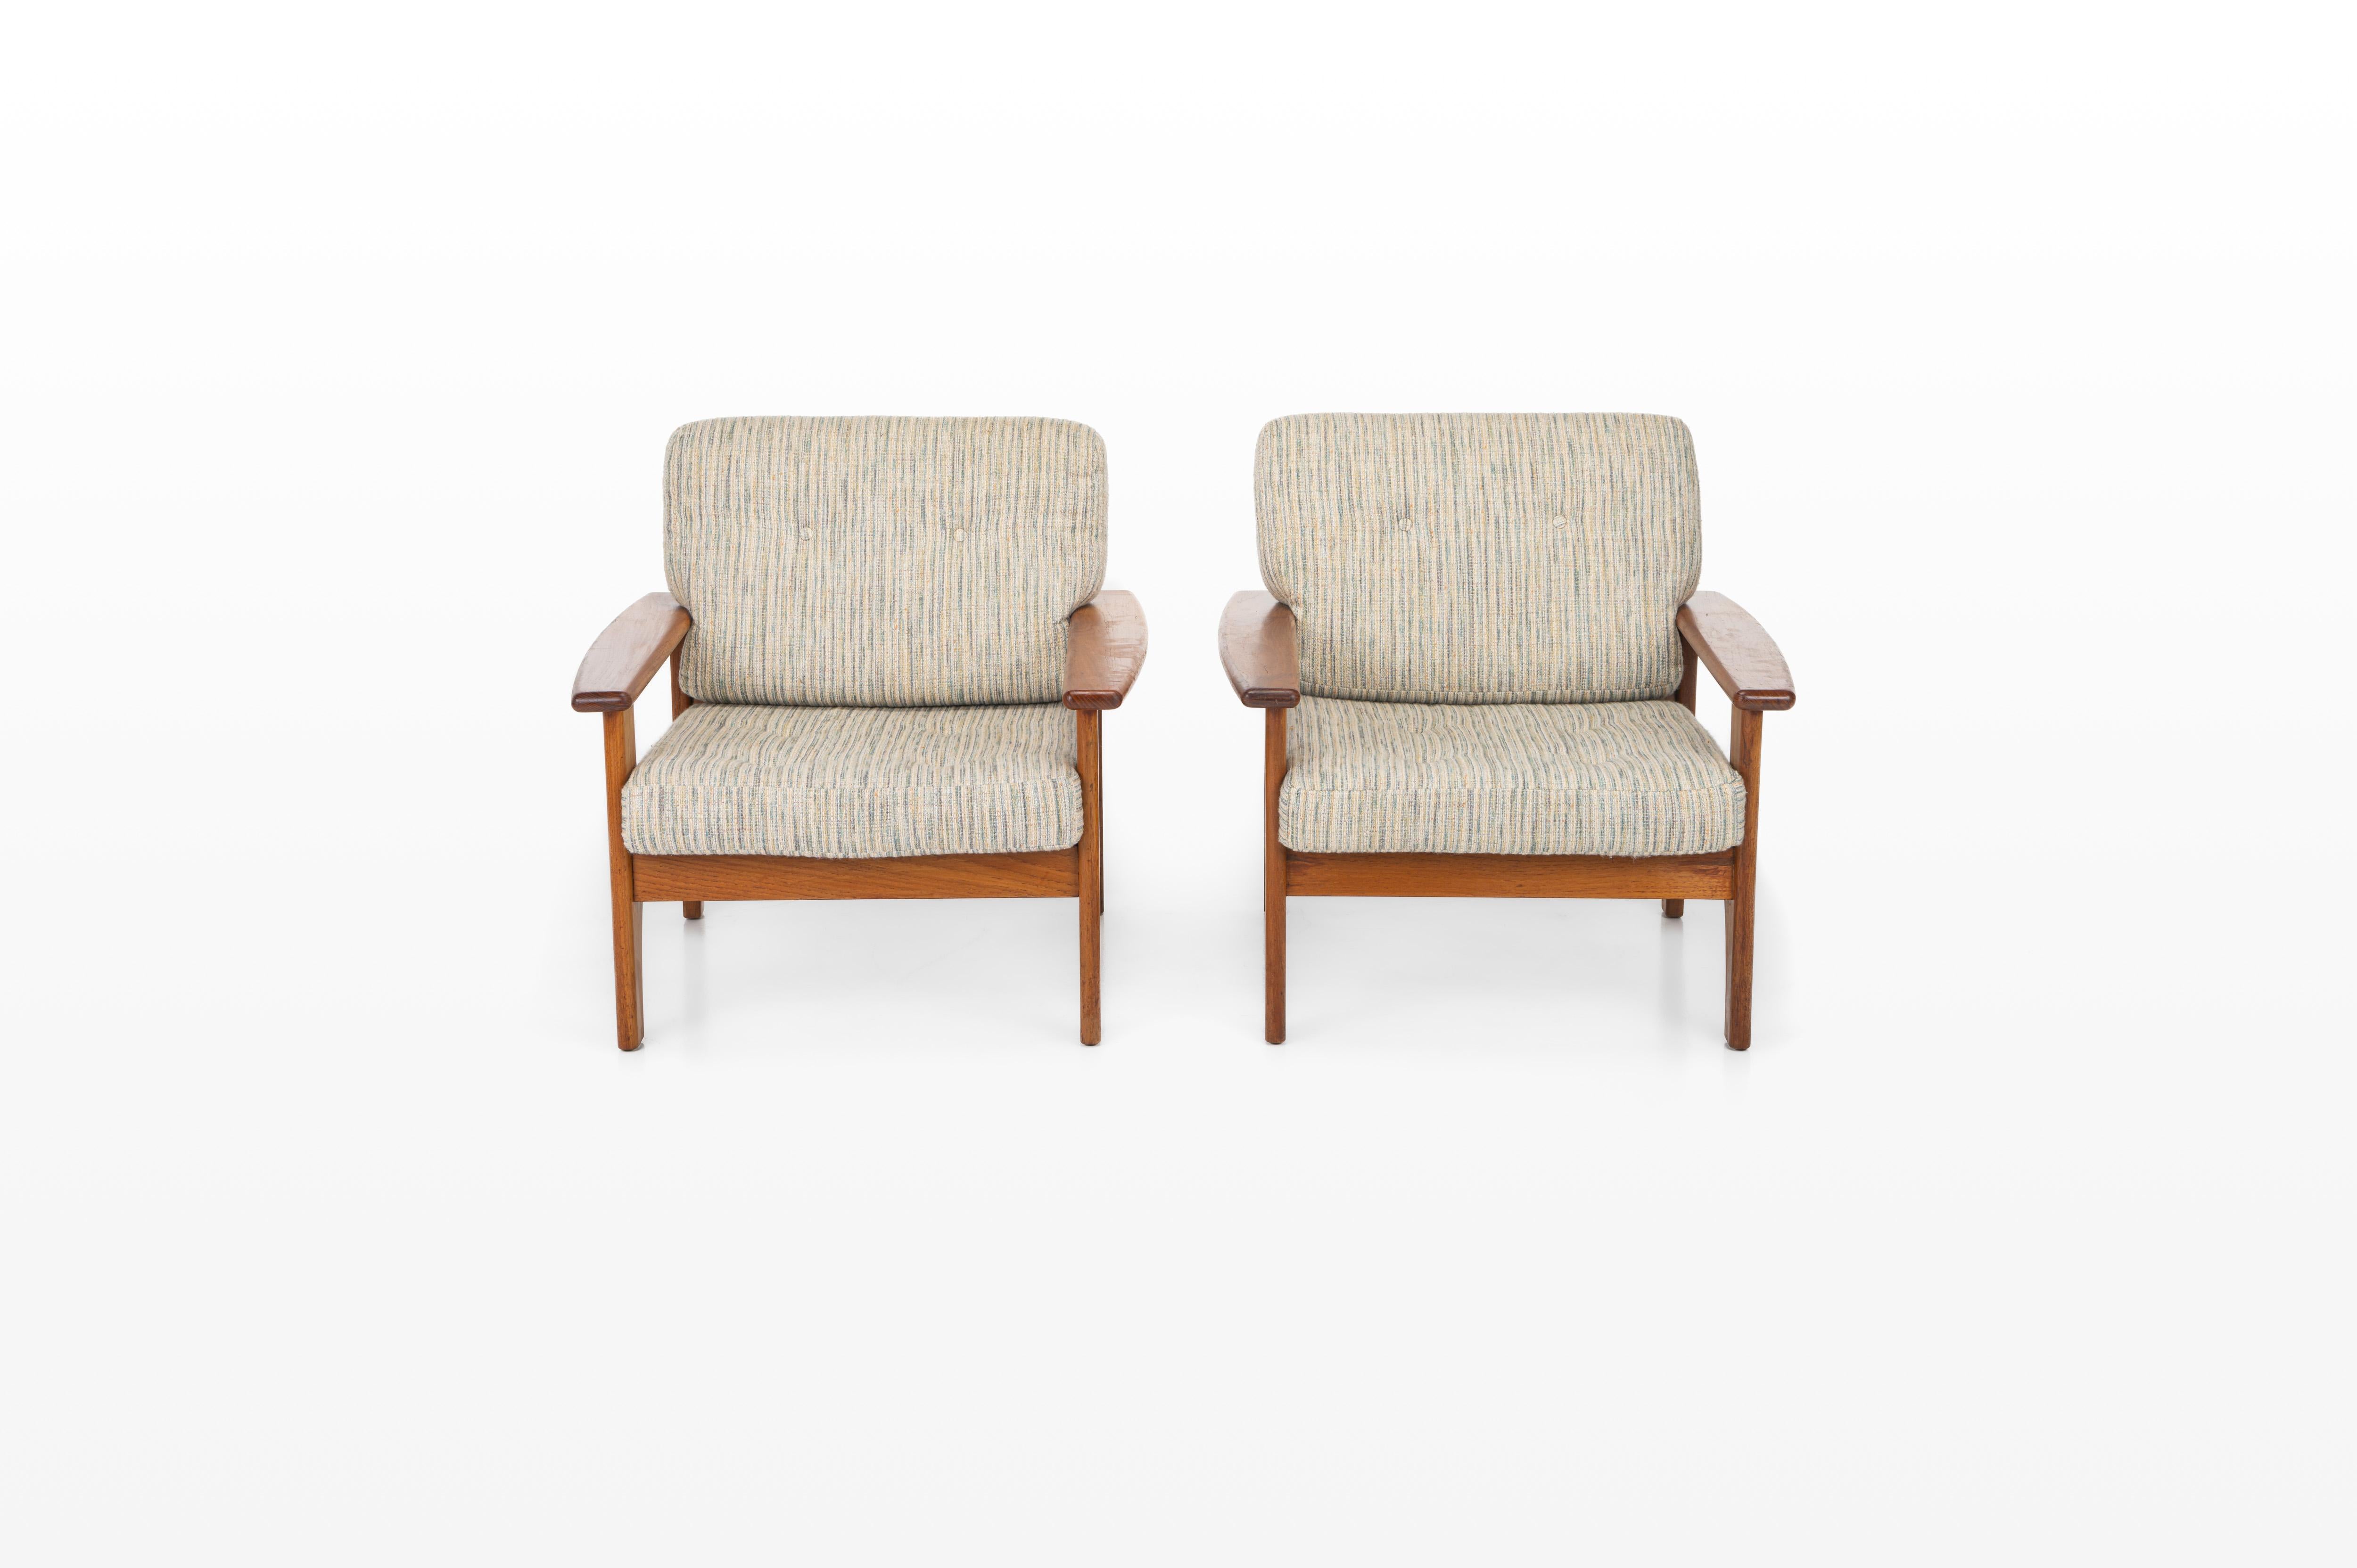 Nice set of two vintage lounge chairs. These lounge chairs were produced in Denmark in the 1960s. They have a teak frame and white-blue fabric. We also have the matching sofa available.

Dimensions:
W: 80 cm
D: 80 cm
H: 78 cm